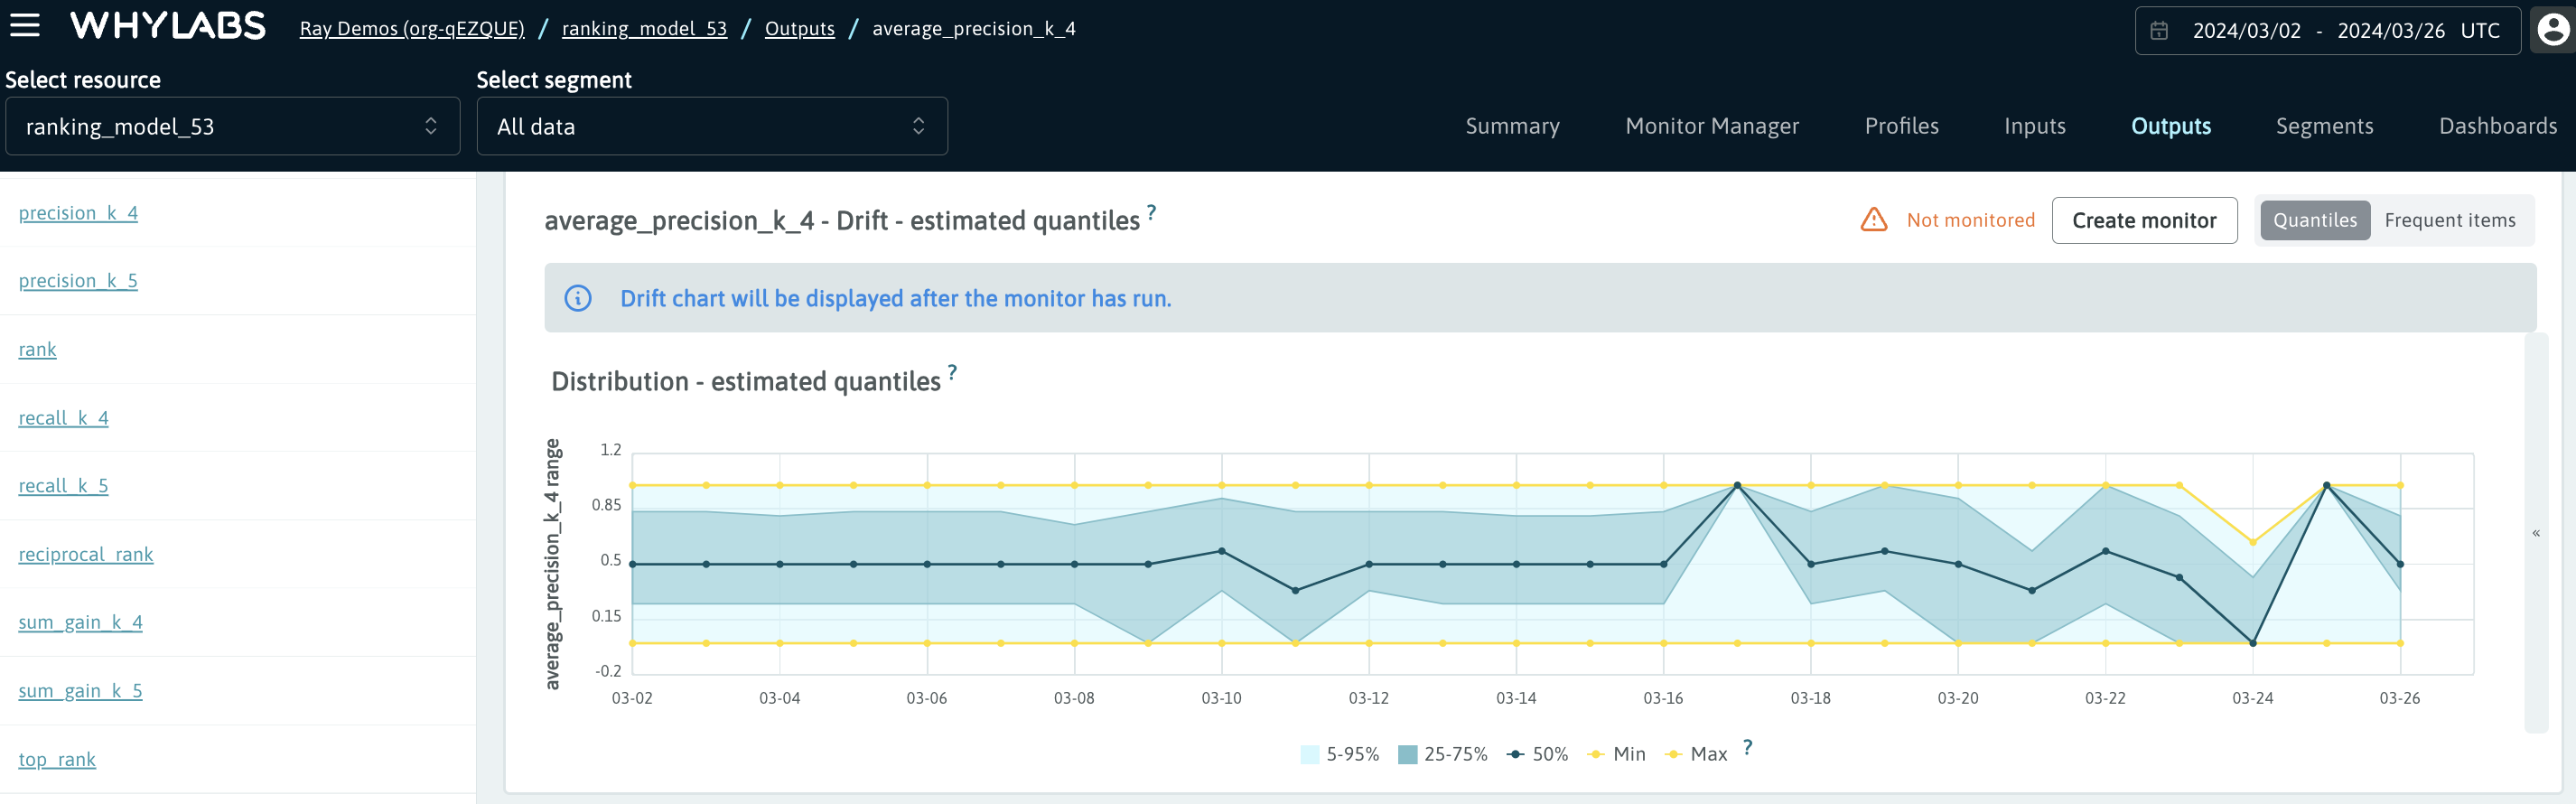 Outputs page with ranking metrics - detailed view